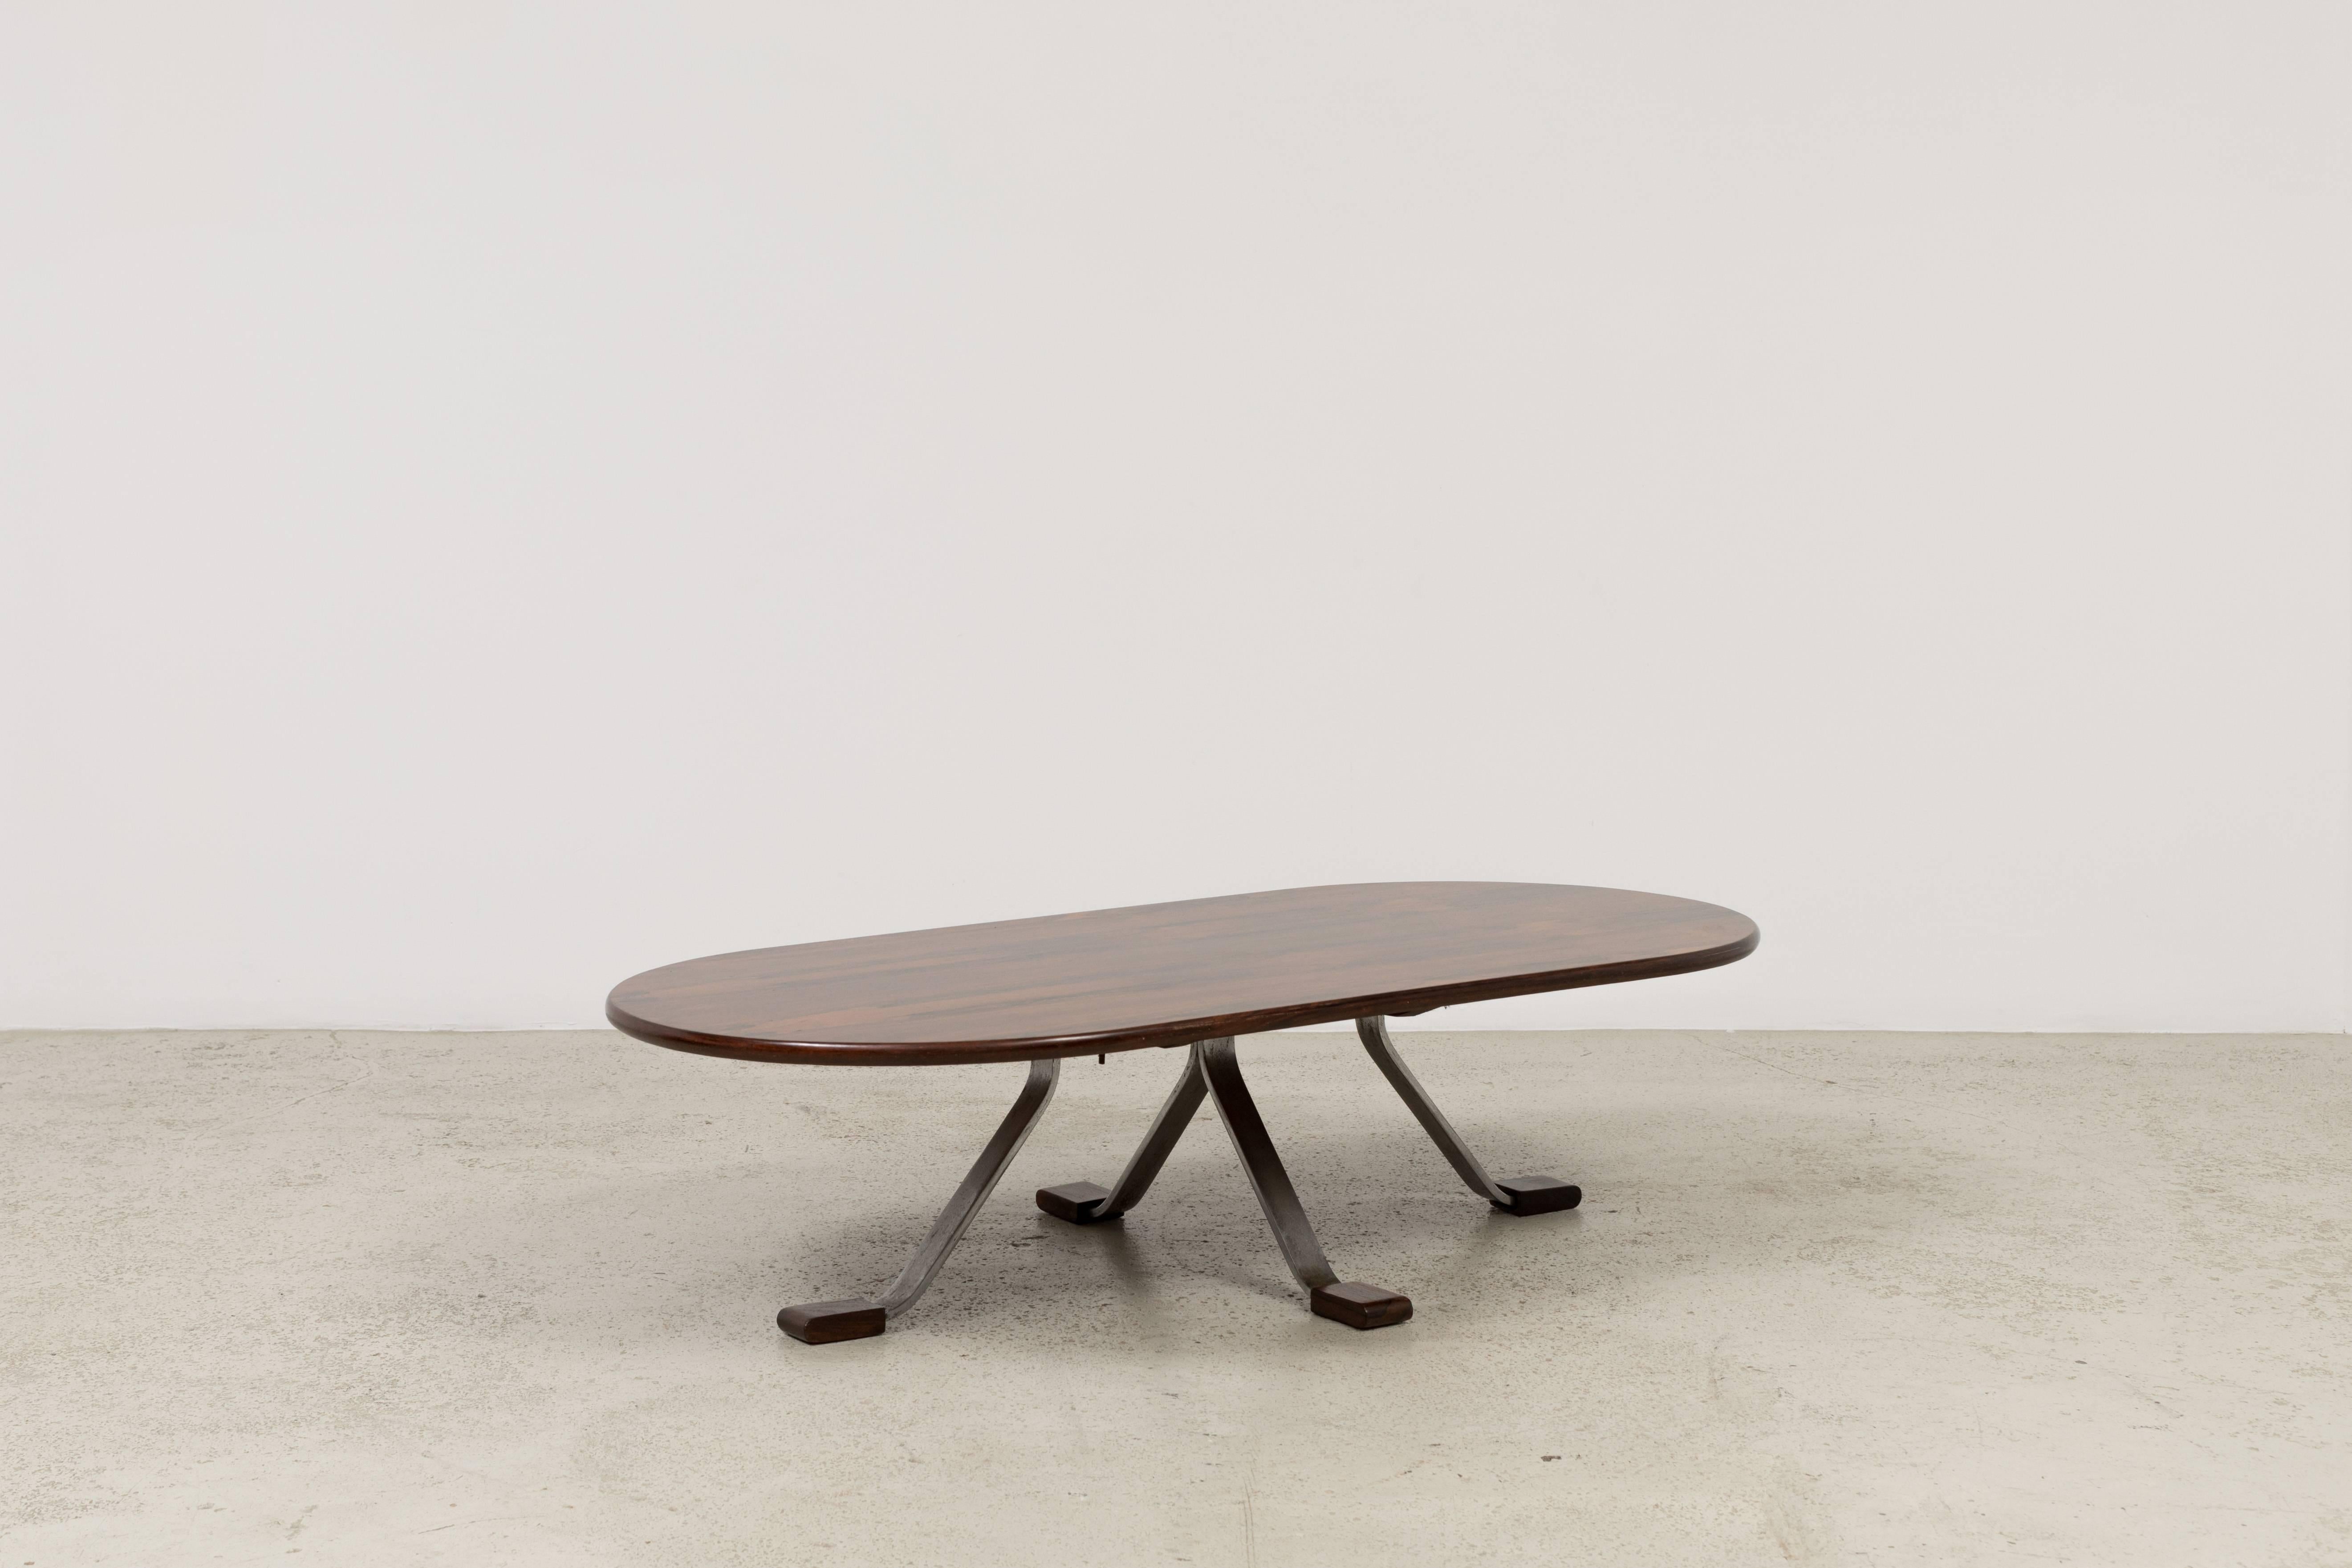 Vintage Lafer oval coffee table by Percival Lafer designed in the late 1960s. Top made of jacaranda wood and metal legs with jacaranda wood detail.
 